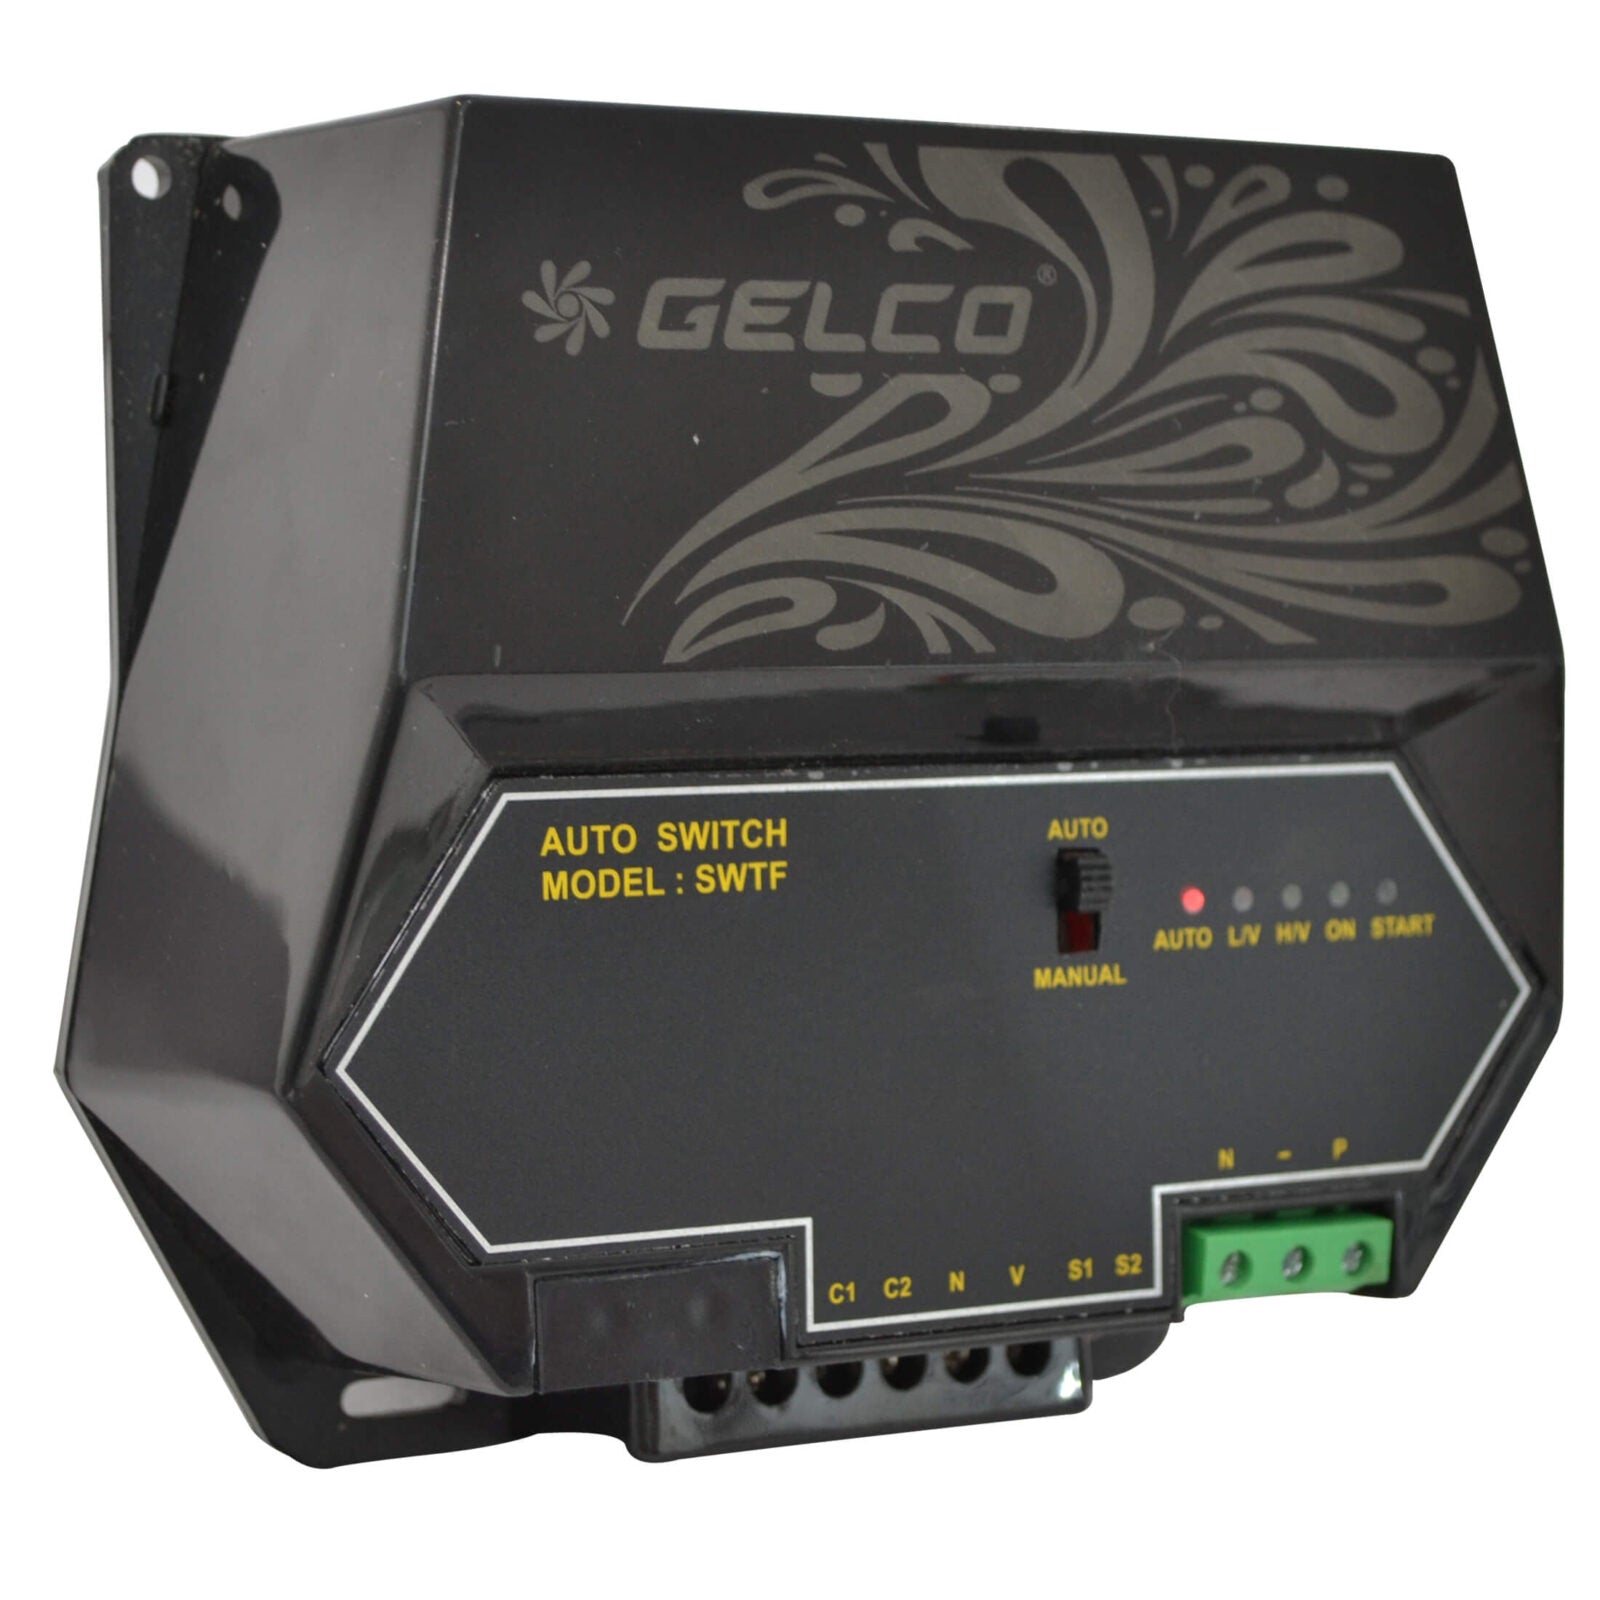 Gelco Single Phase Auto Switch, Efficiently Operate Submersible, Monoset Pumps And Motors, Auto ON Delay Time - Gelco Electronics Pvt. Ltd.